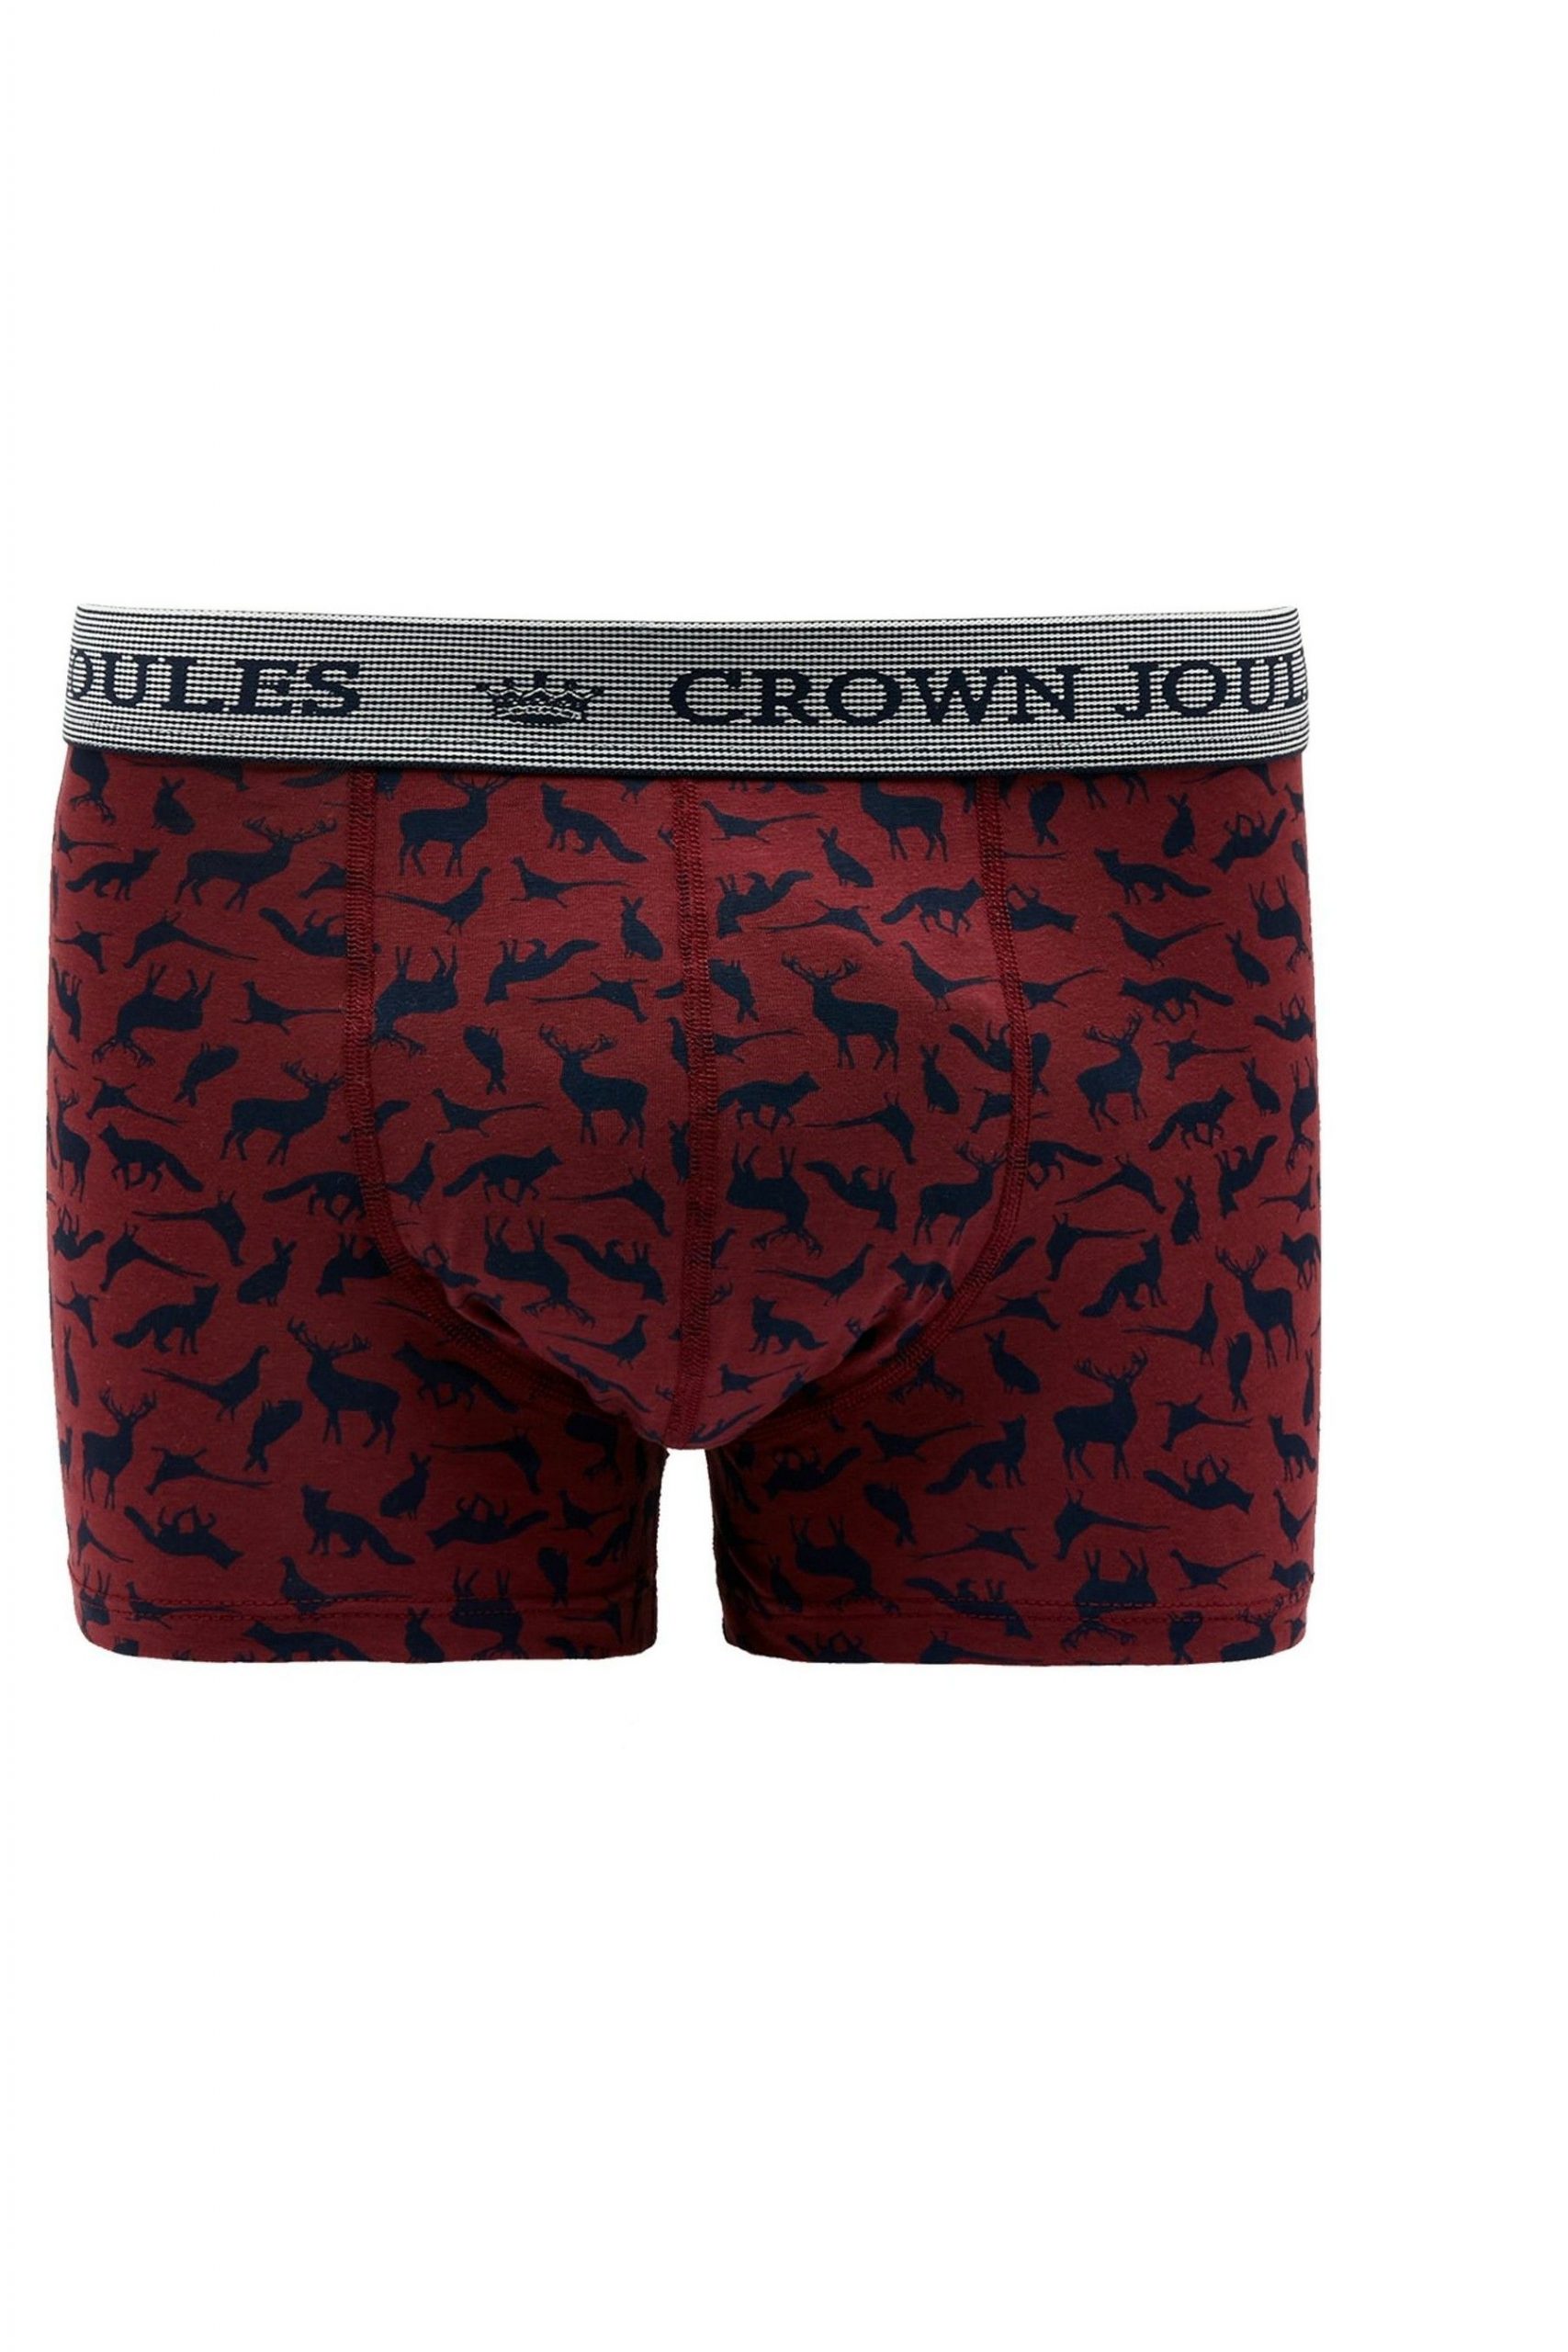 Select Joules Blue Crown Underwear 2 Pack Limited Edition | 2023 only 50$